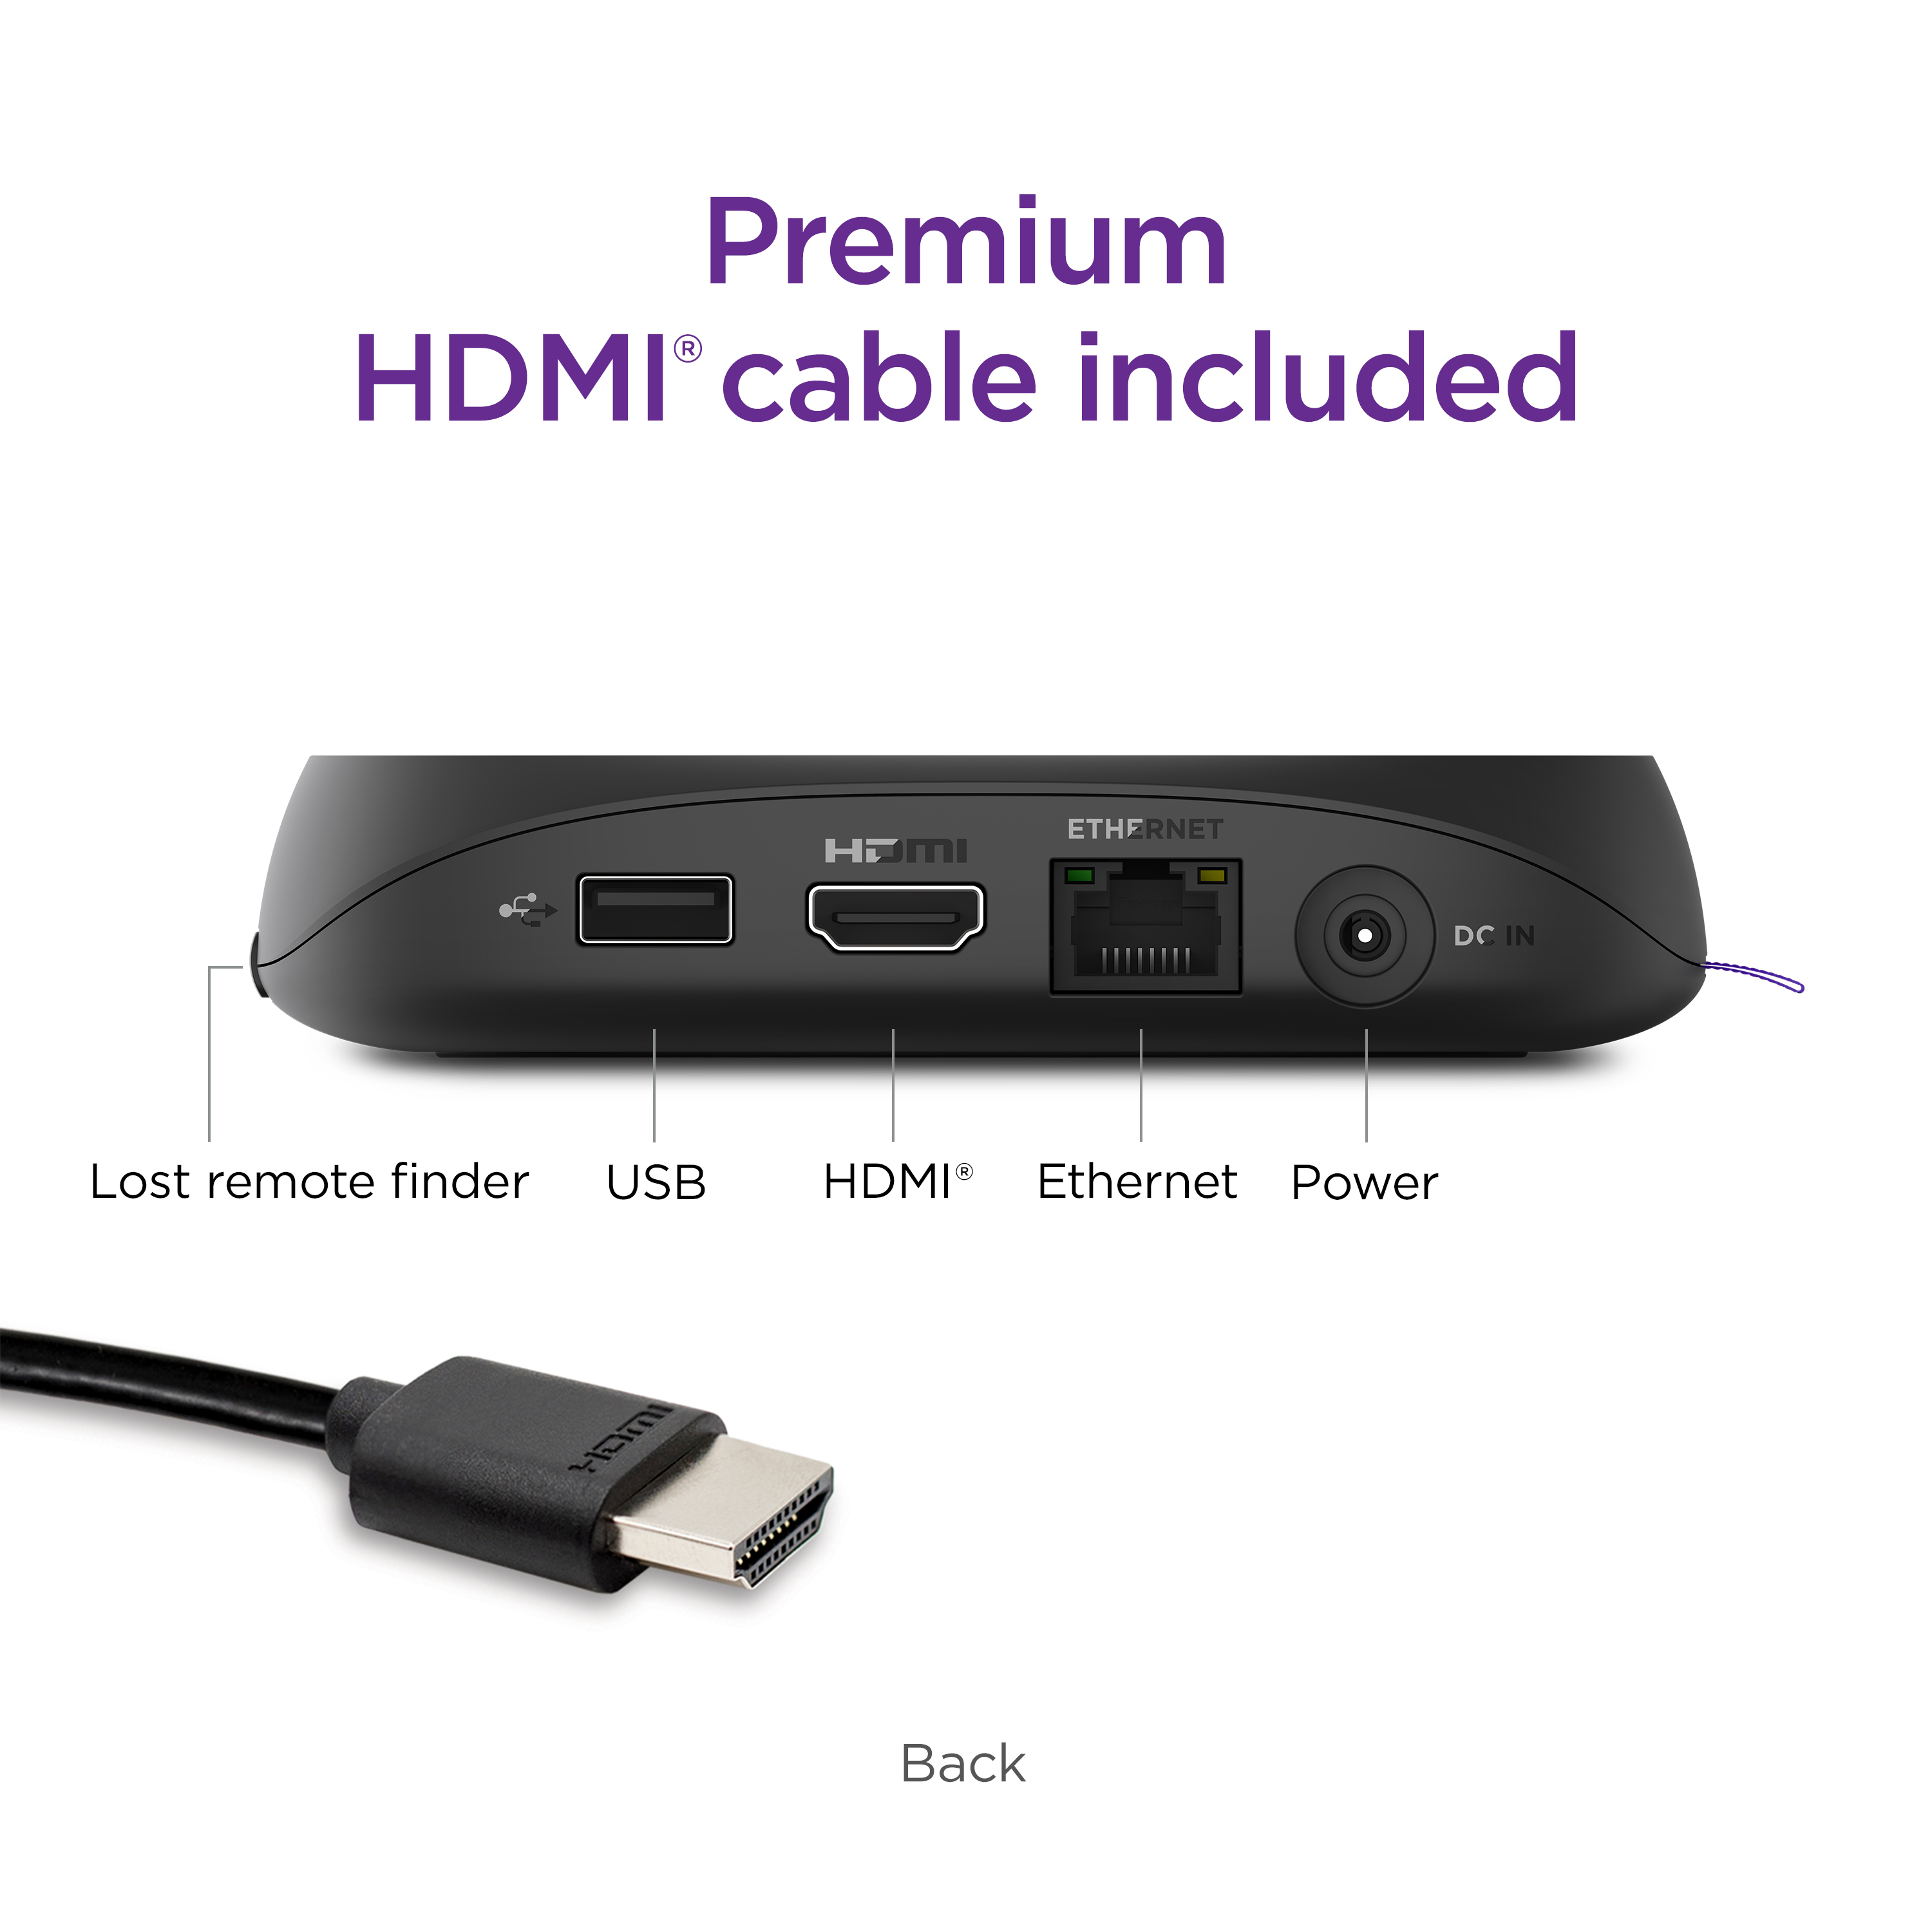 Roku Ultra | Streaming Device 4K/HDR/Dolby Vision, Roku Voice Remote with Headphone Jack, Premium HDMI® Cable - image 4 of 16